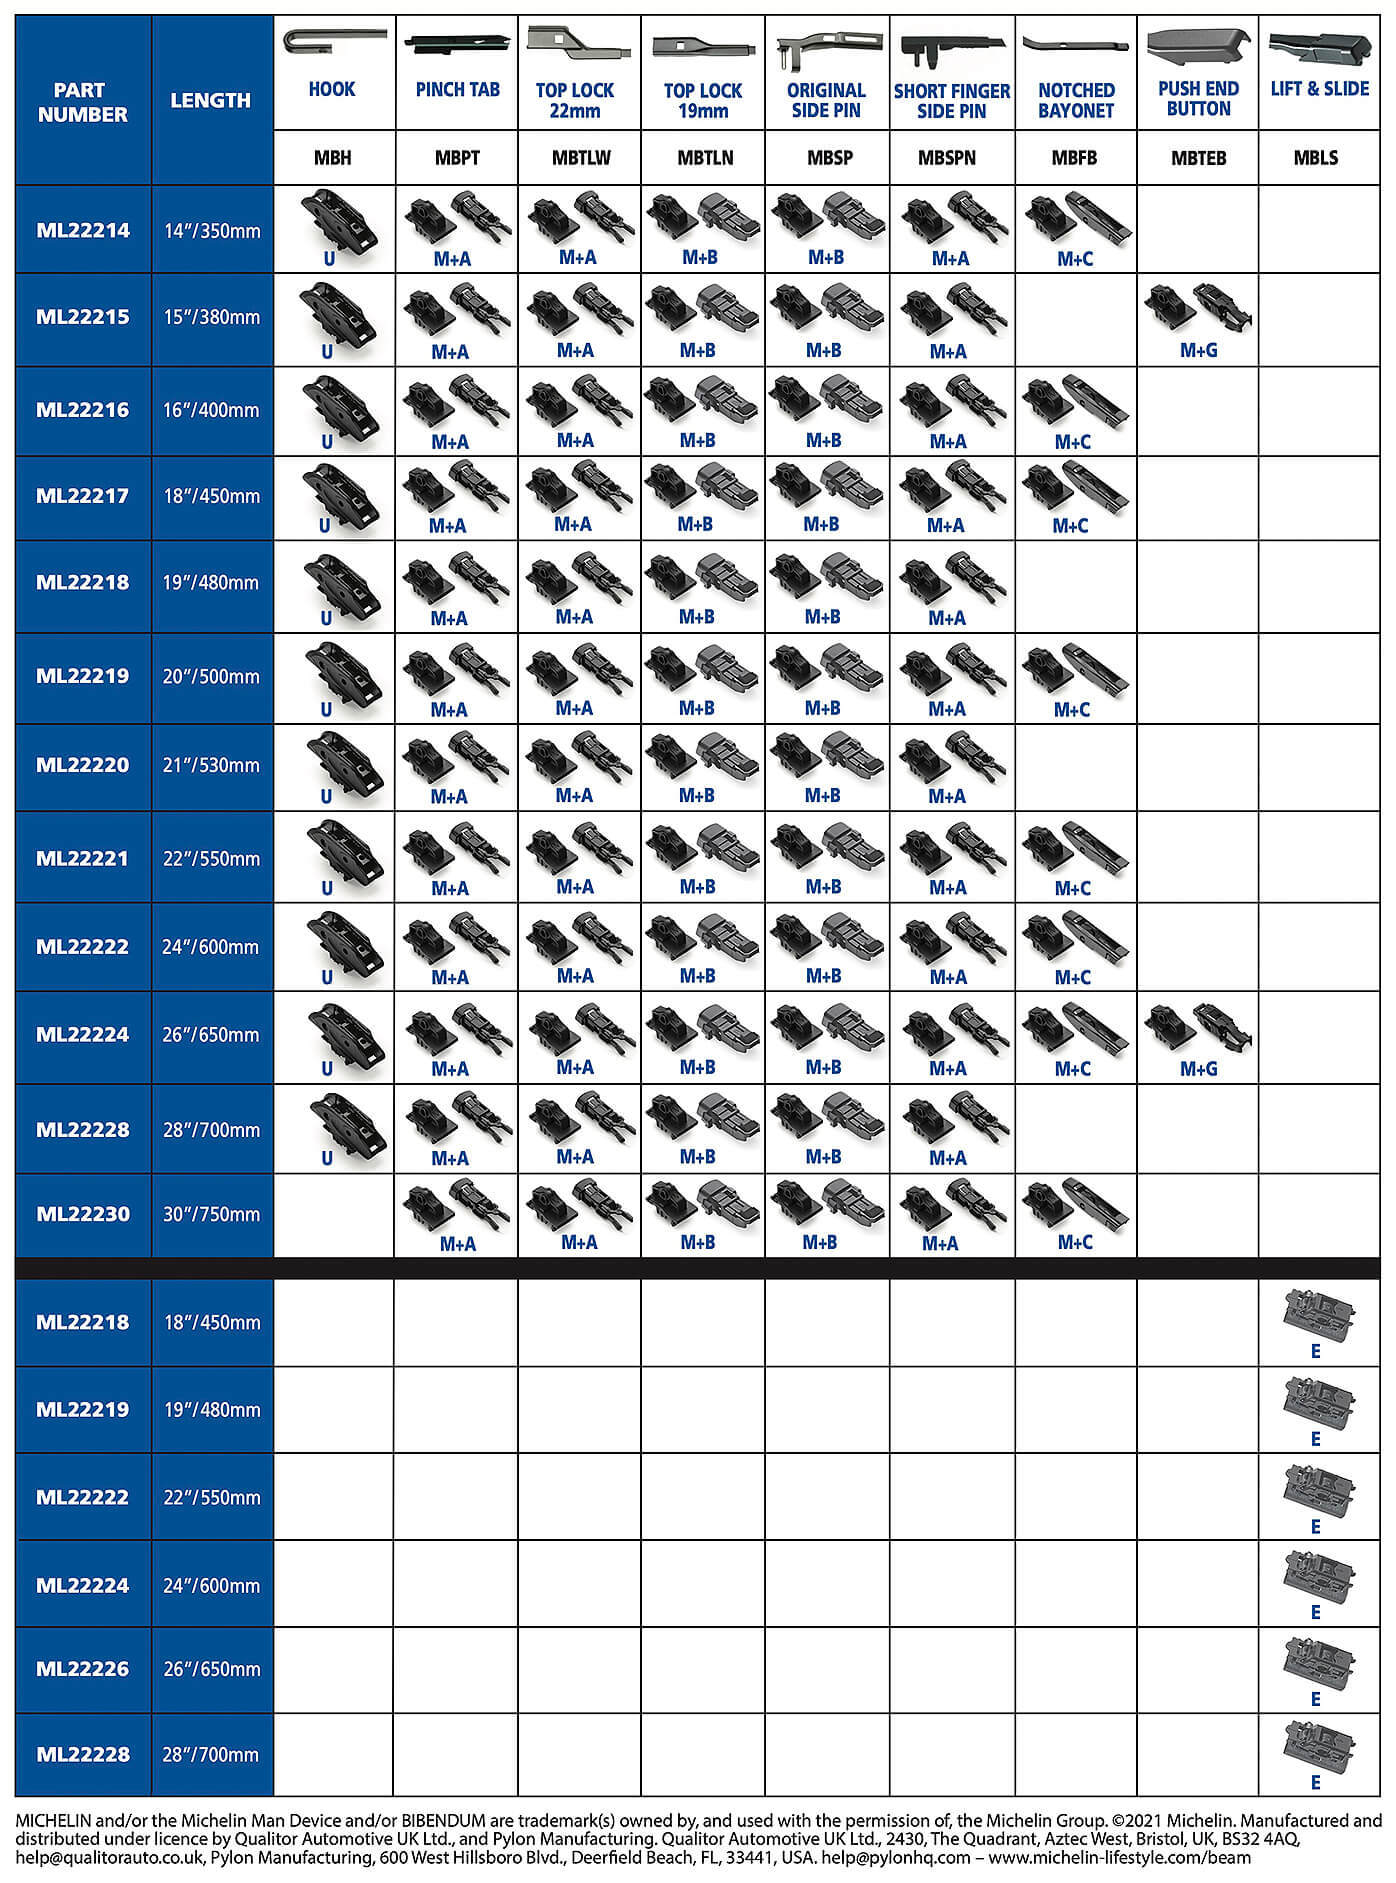 MICHELIN fitment guide table